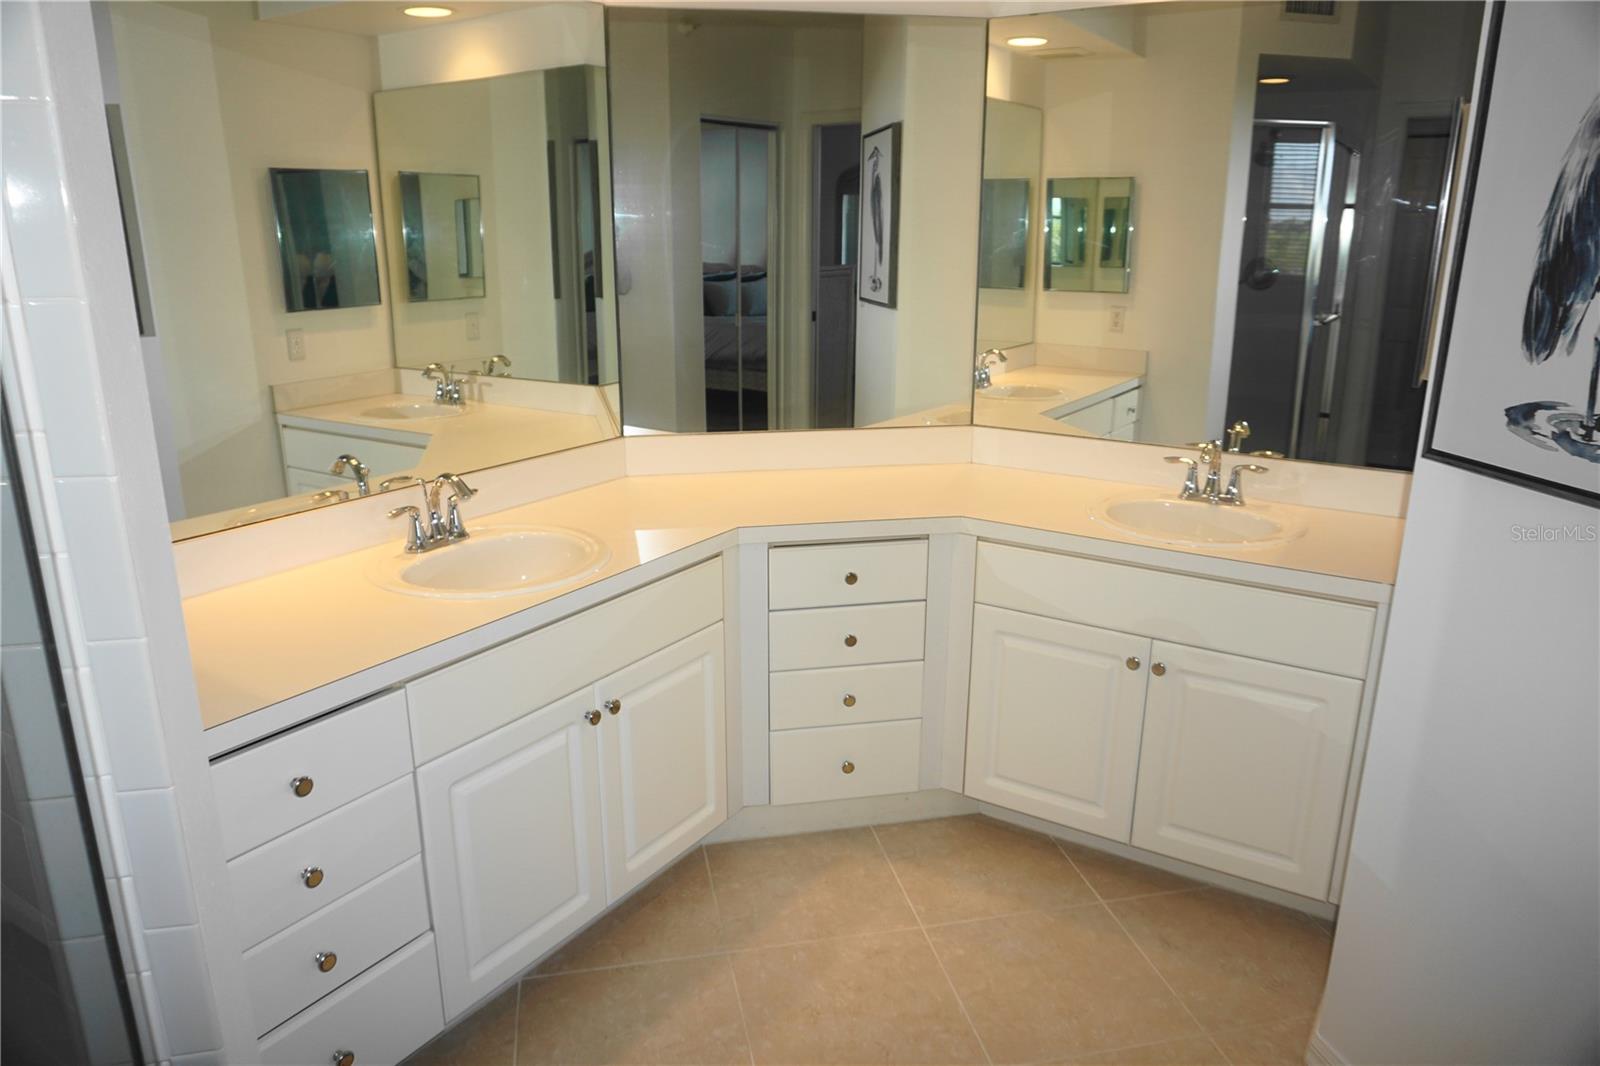 The ensuite bathroom features dual sinks and lots of space ...